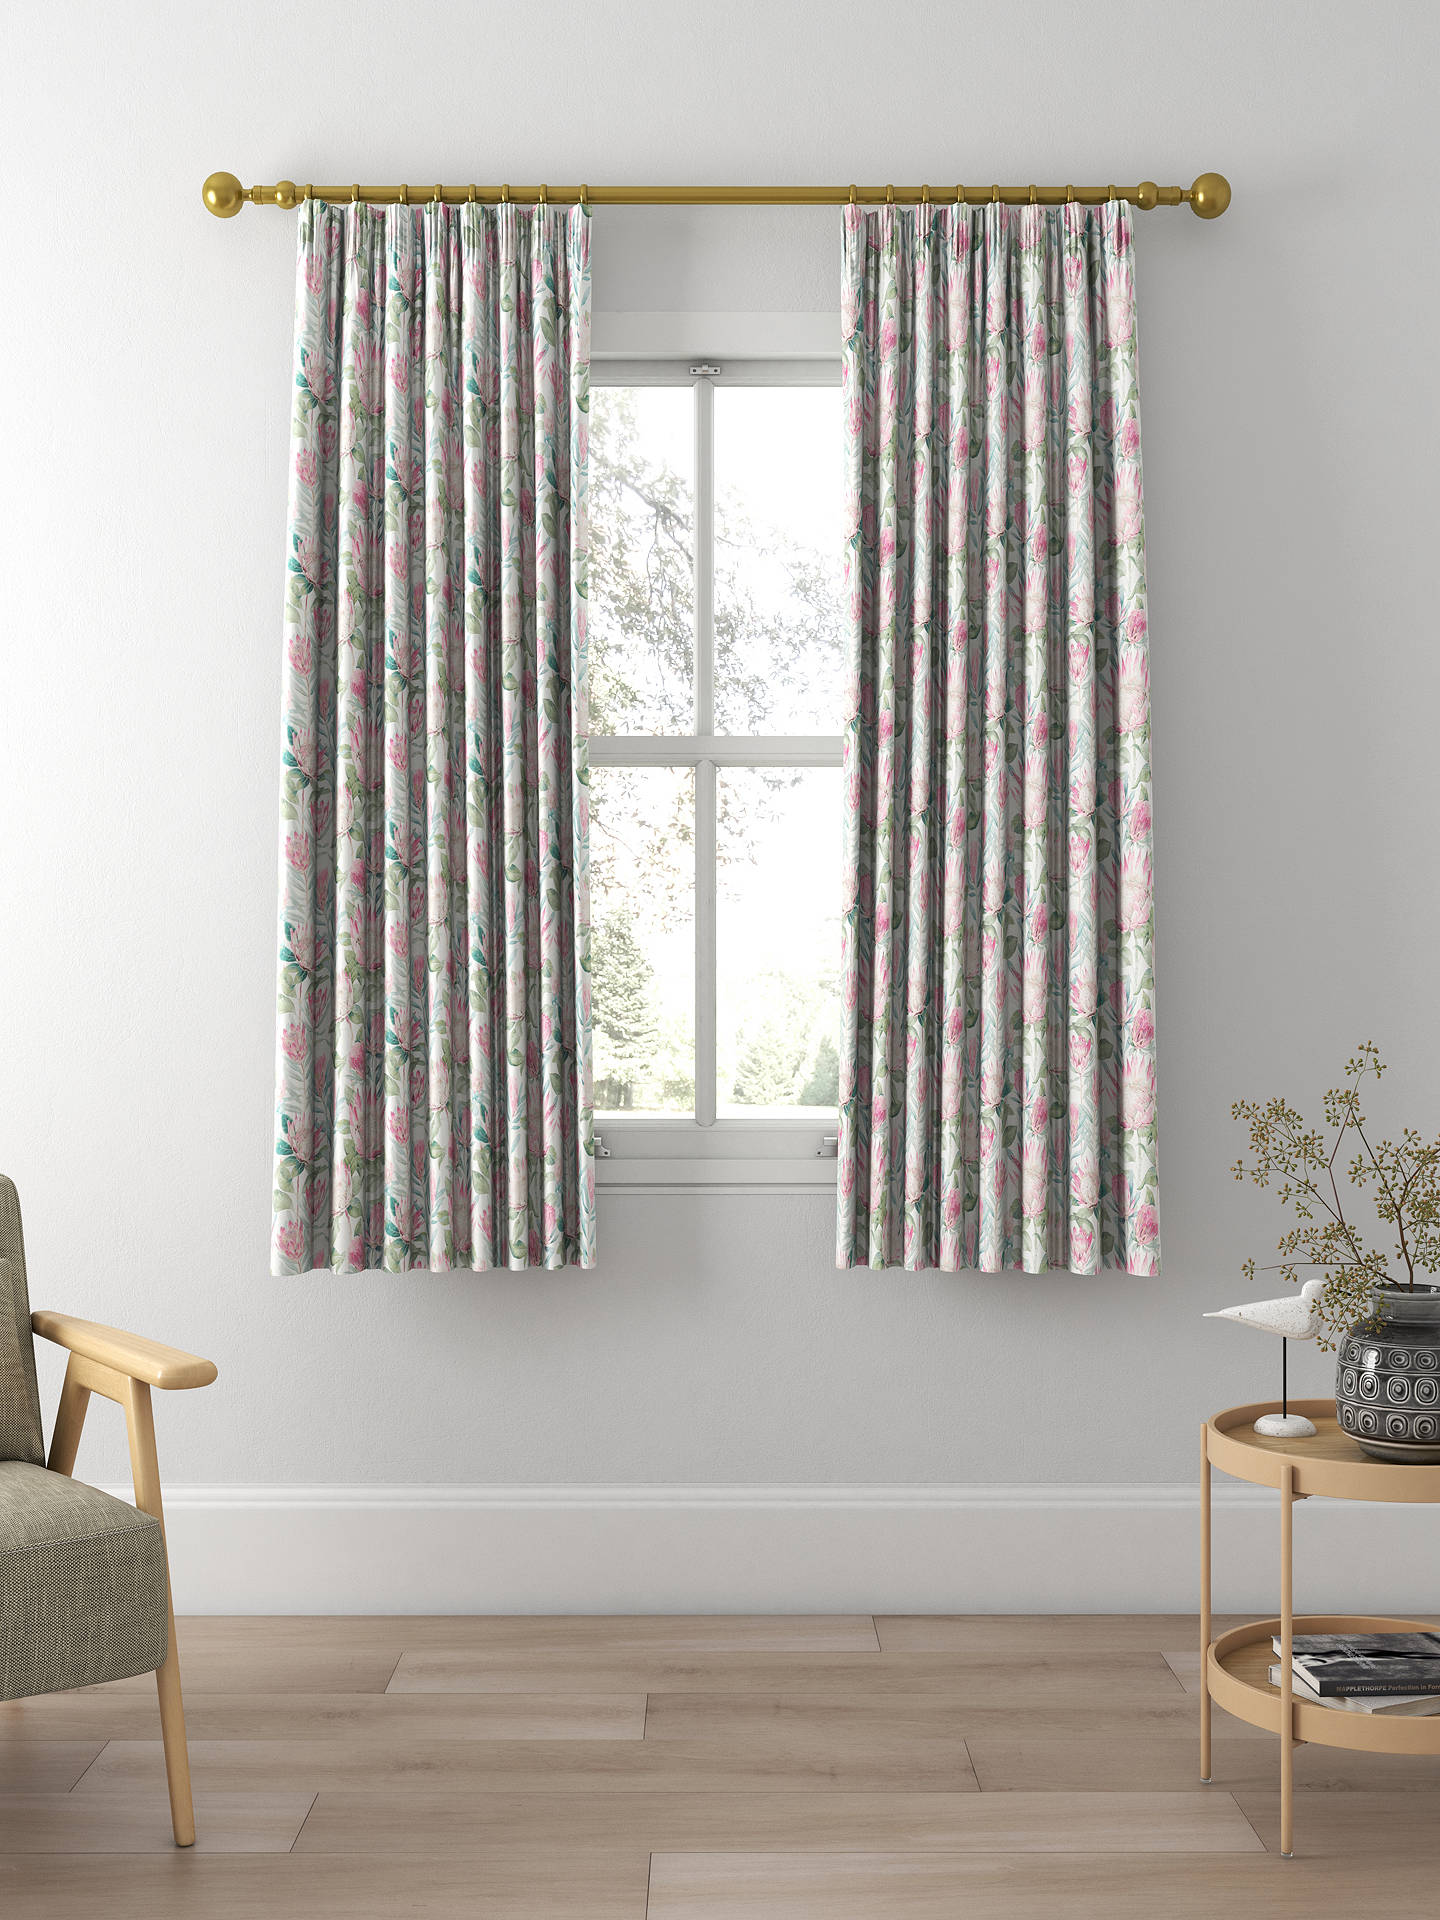 Sanderson King Protea Made to Measure Curtains, Orchid